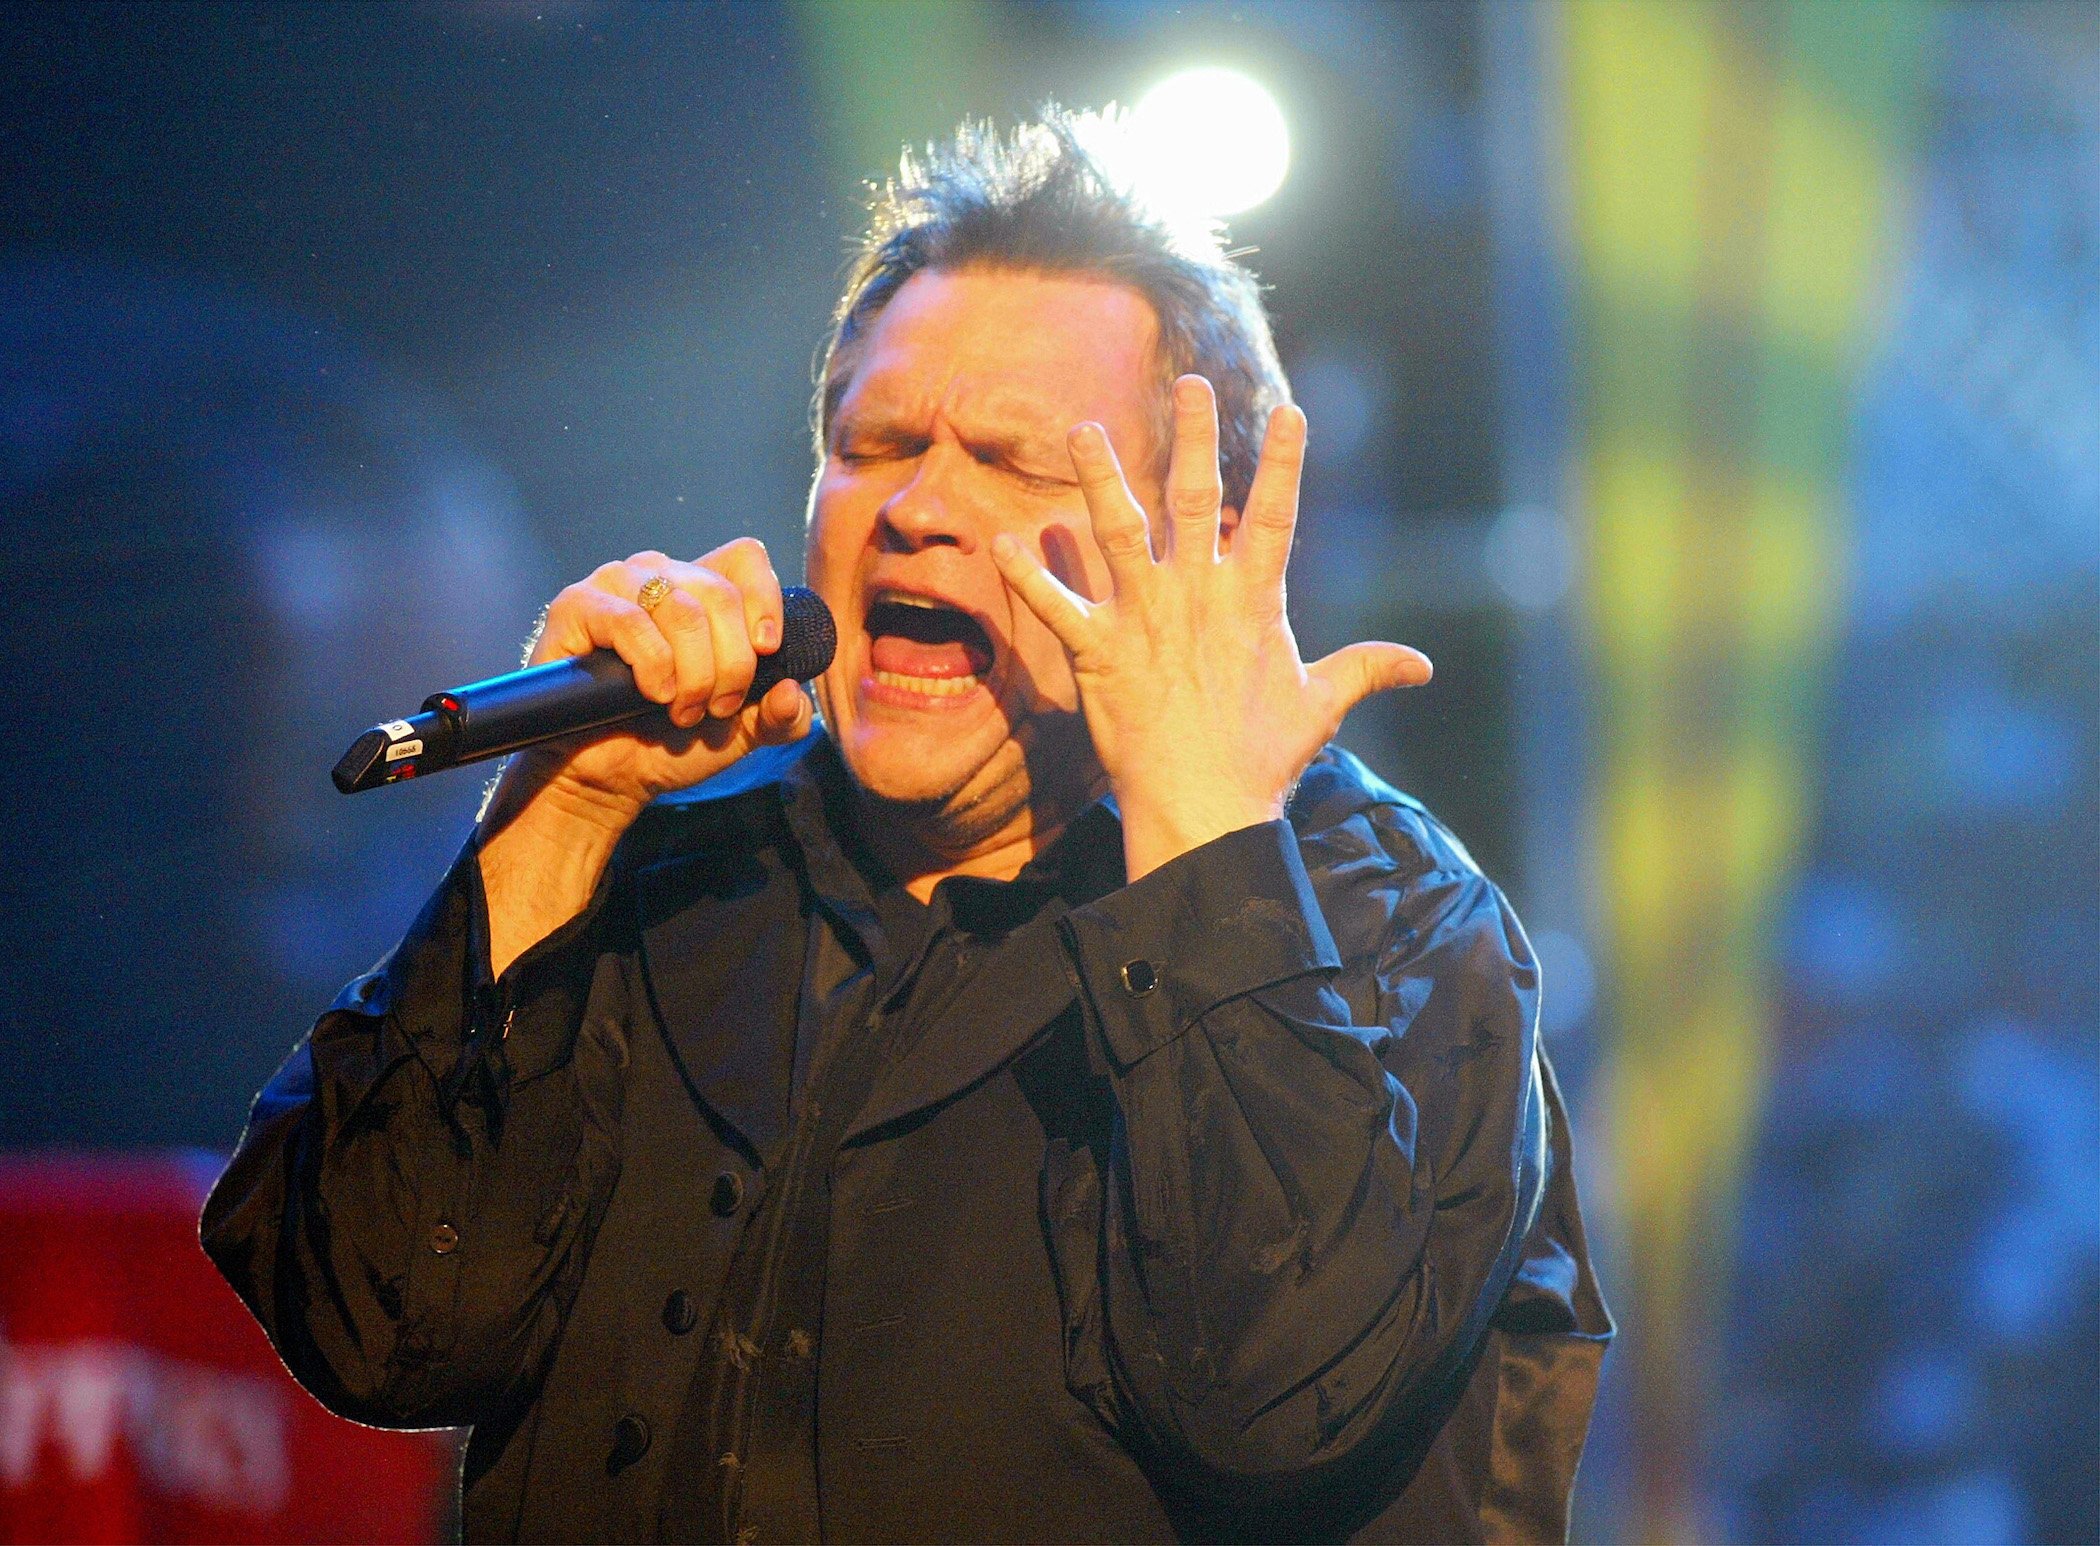 Meat Loaf passionately singing on stage